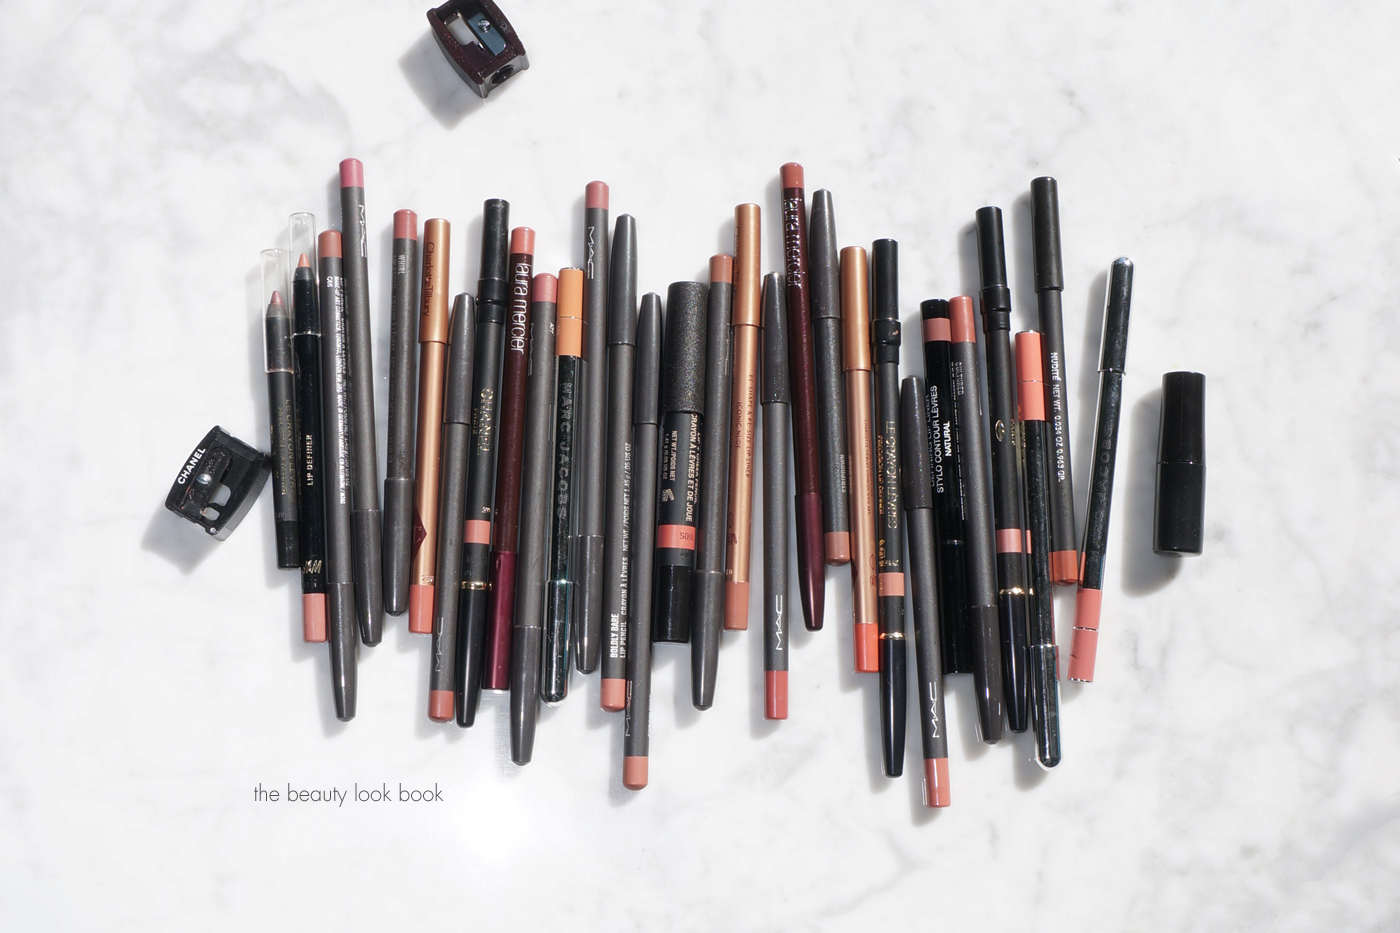 My Favorite Neutral Pink and Nude Lip Liner Pencils - The Beauty Look Book